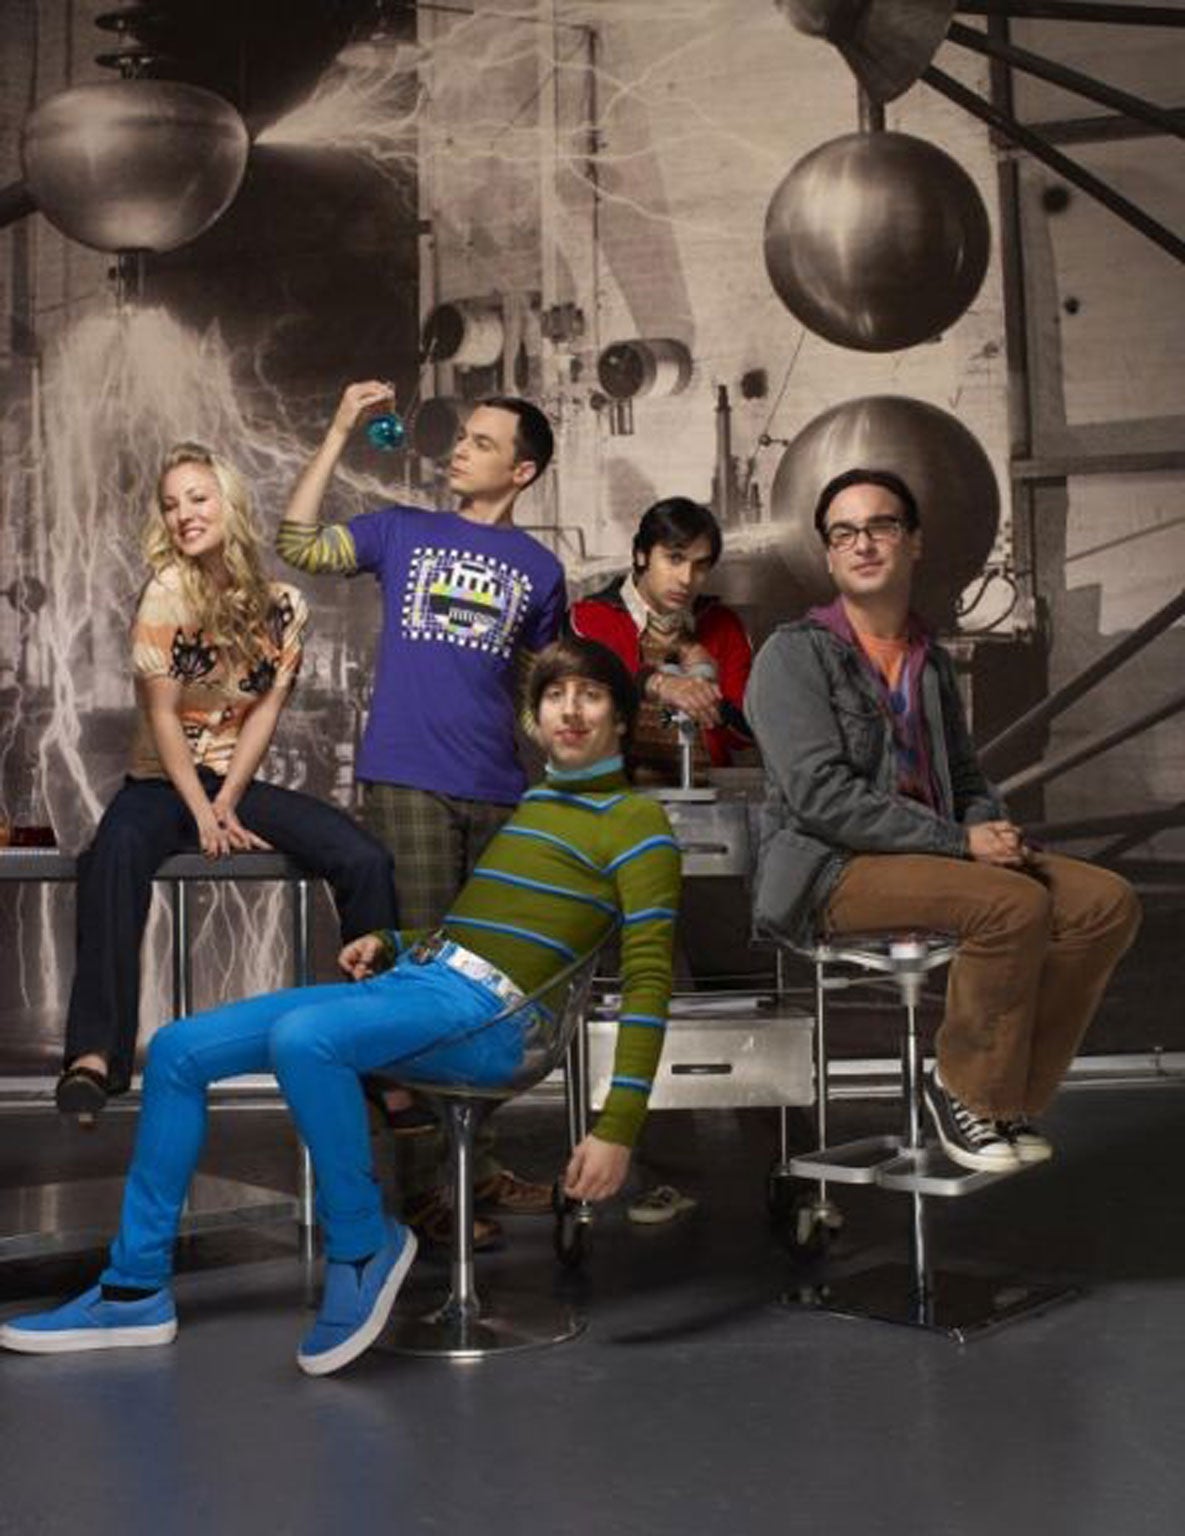 The Big Bang Theory's lead cast members have become the highest paid performers in TV